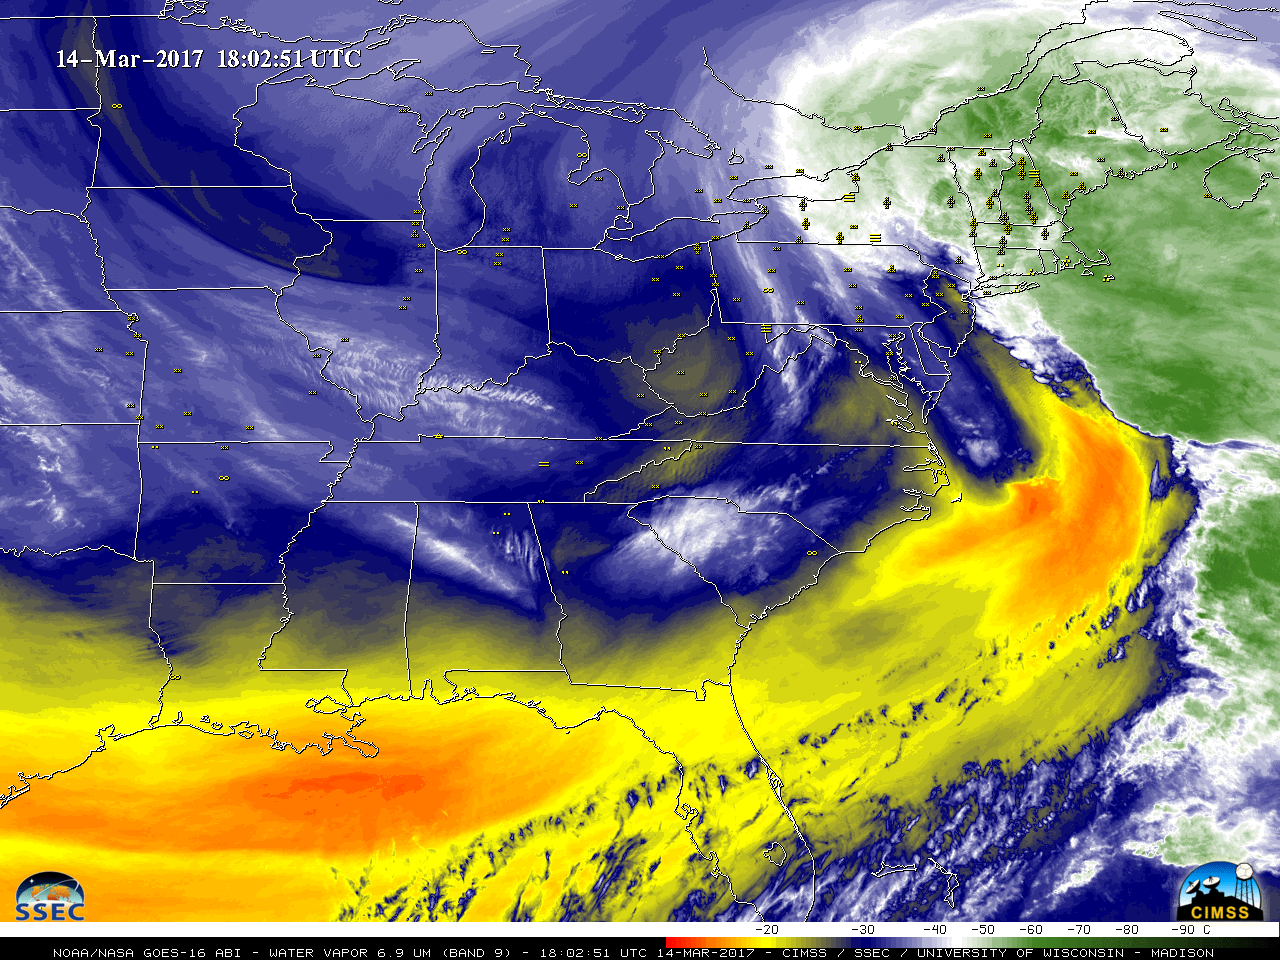 GOES-16 Water Vapor (6.9 µm) images, with hourly plots of surface weather [click to play MP4 animation]